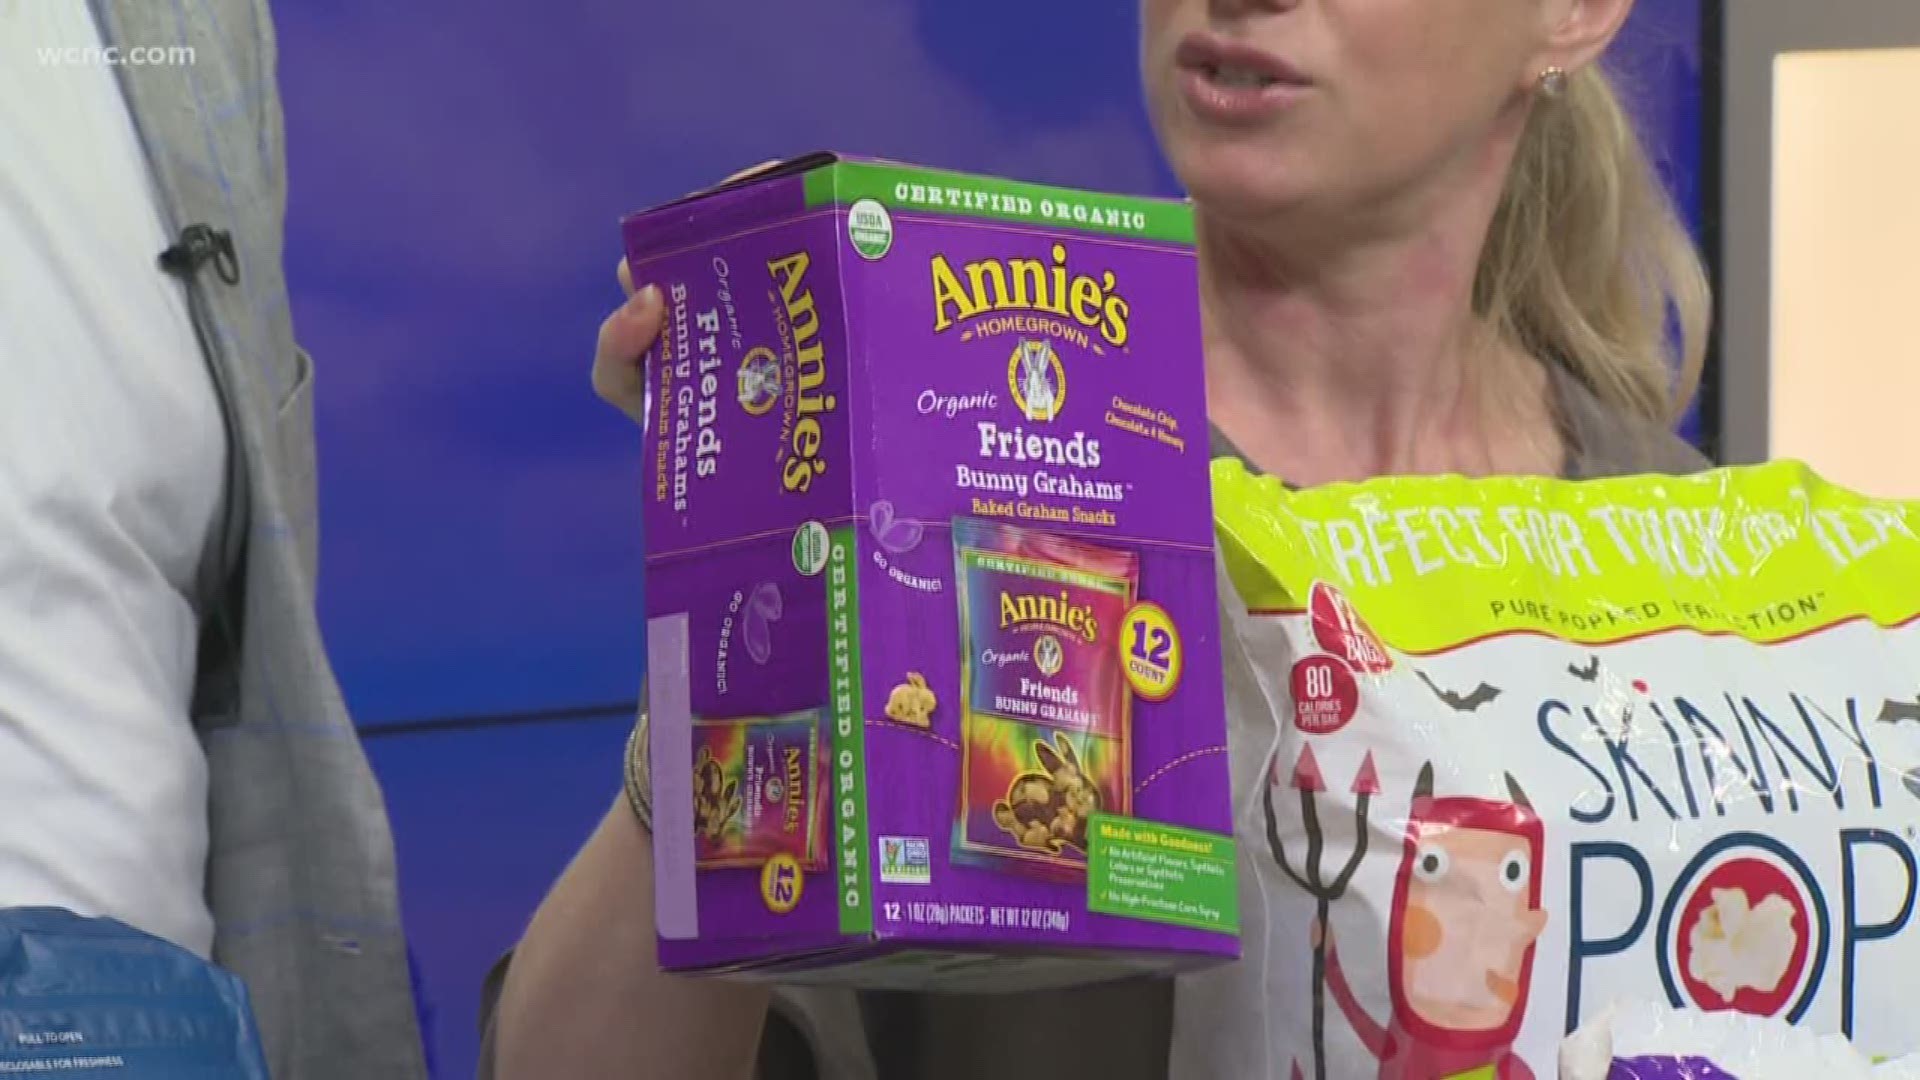 Brett Blumenthal shares fun treat options and advice on trick or treating for a healthier Halloween.